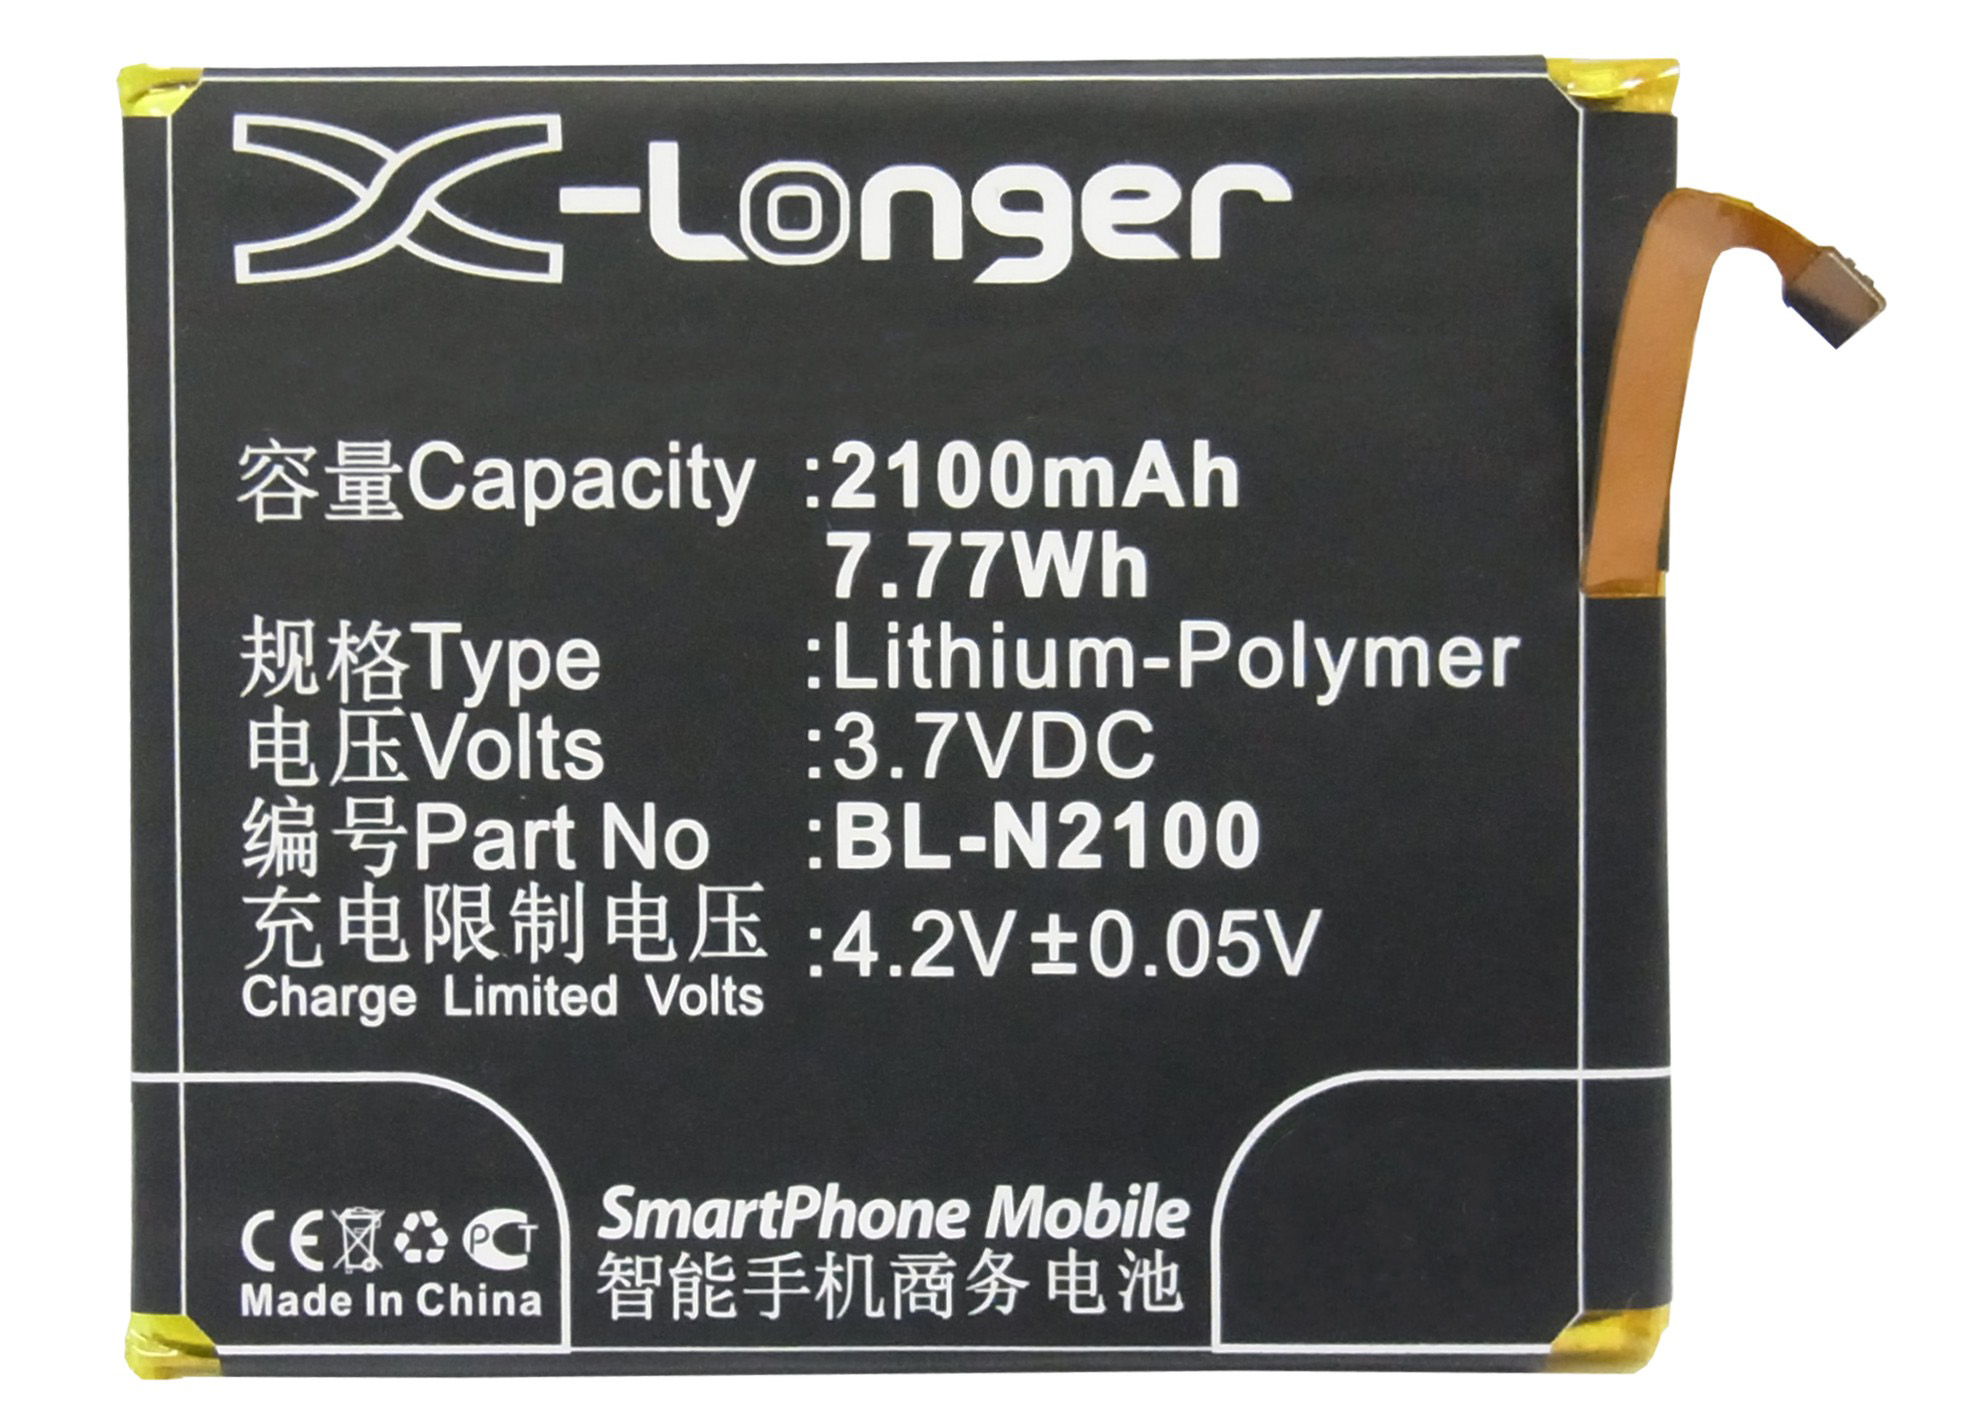 Synergy Digital Battery Compatible With GIONEE BL-N2100 Cellphone Battery - (Li-Pol, 3.7V, 2100 mAh / 7.77Wh)